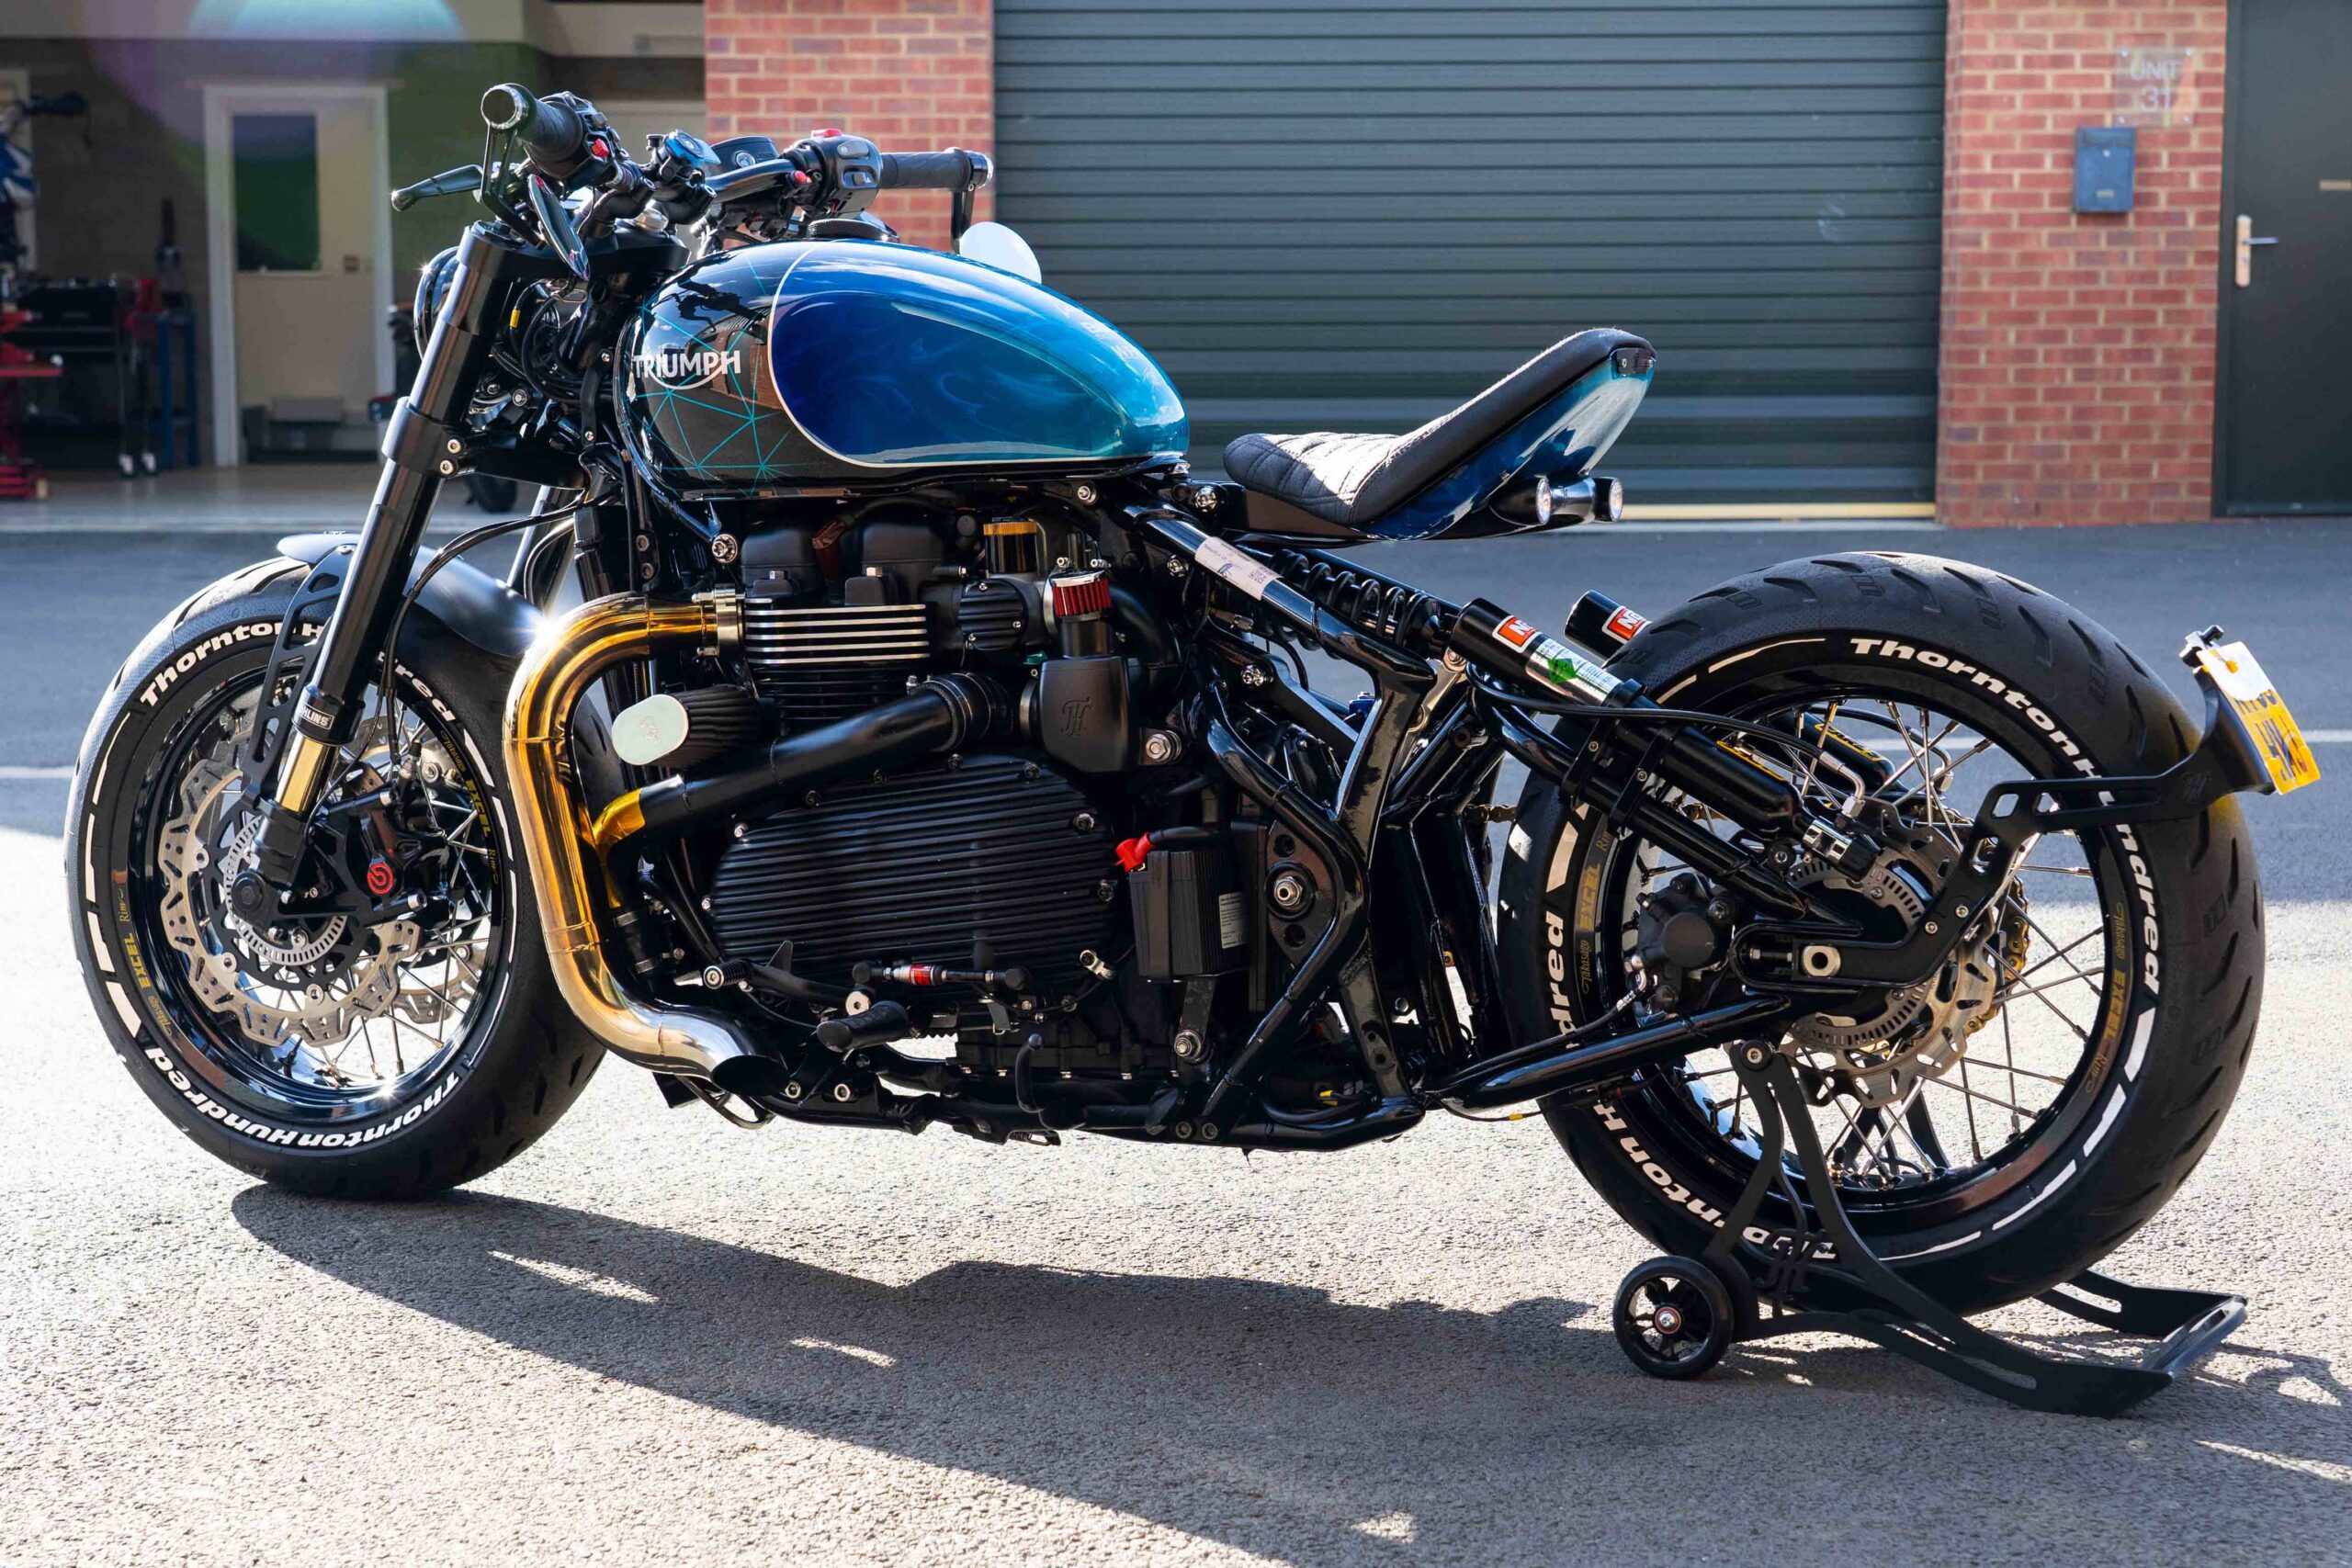 The World's Fastest Bobber: A Triumph Bobber With A Supercharger + NOS –  202 RWHP